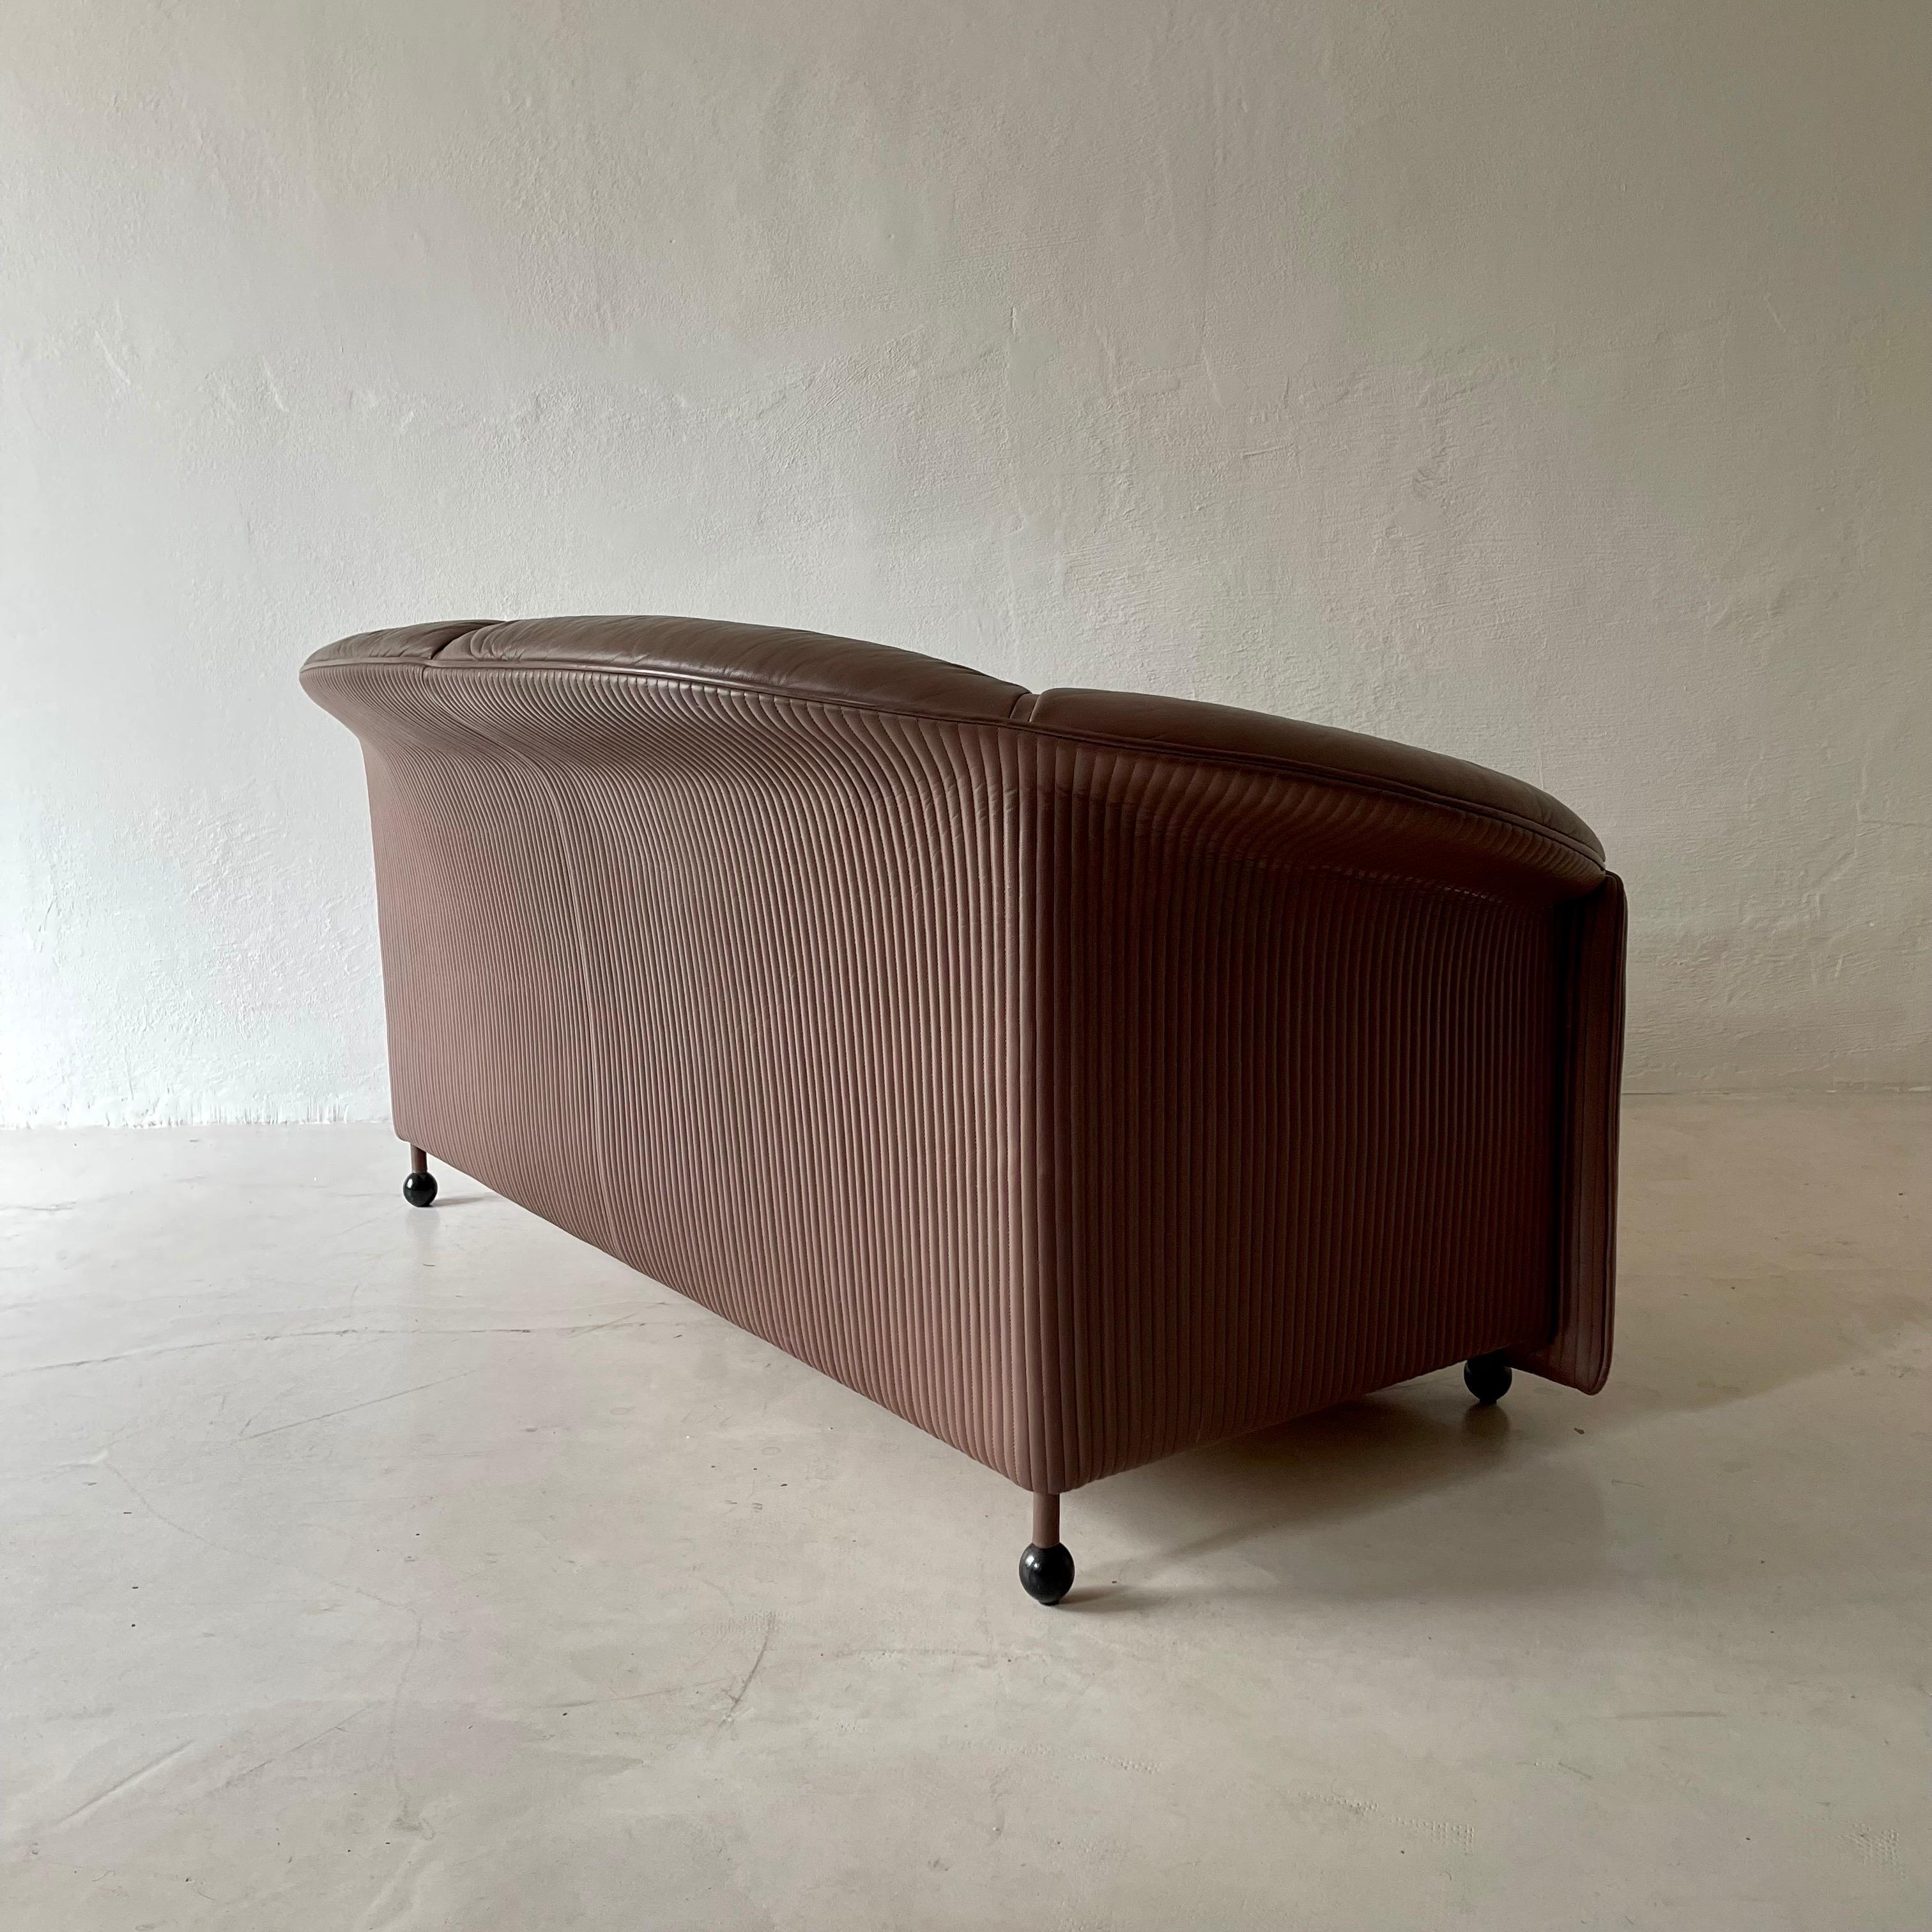 Late 20th Century Aura Sofa Loveseat by Paolo Piva for Wittmann For Sale